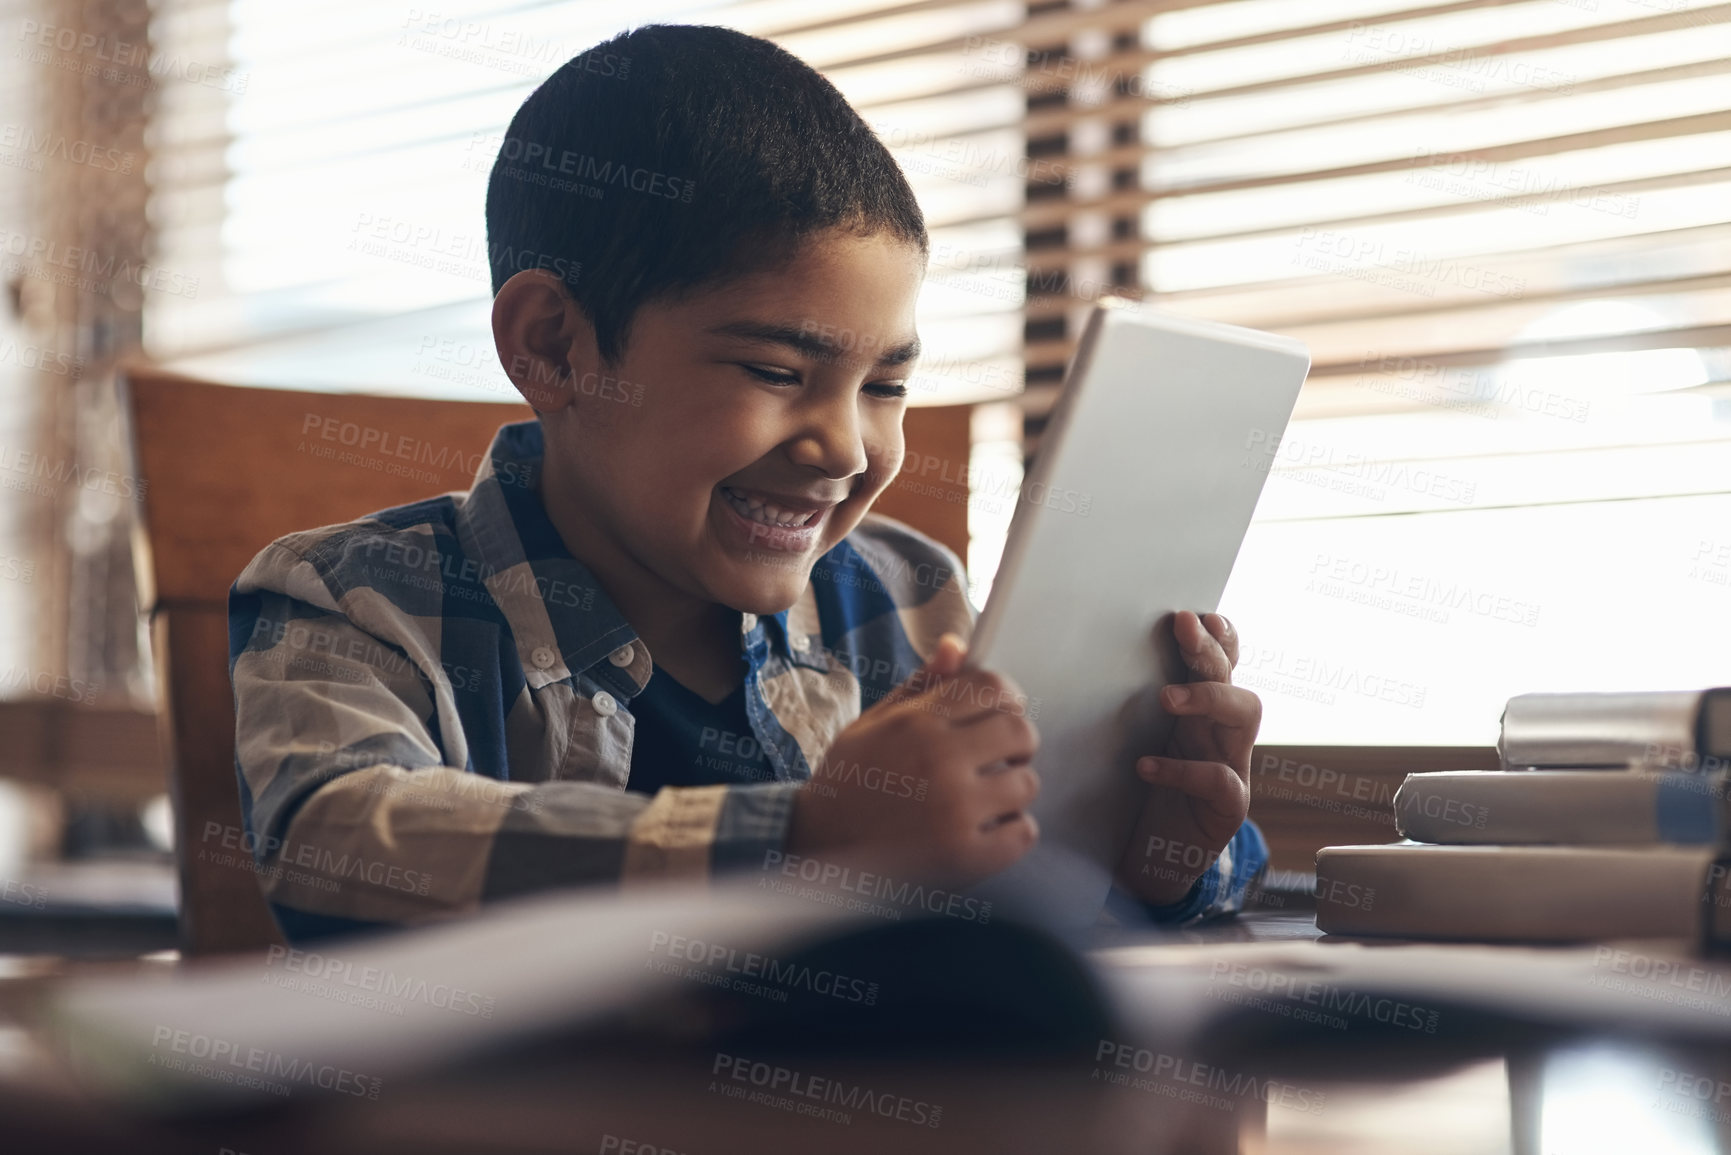 Buy stock photo Shot of an adorable little boy using a digital tablet while completing a school assignment at home